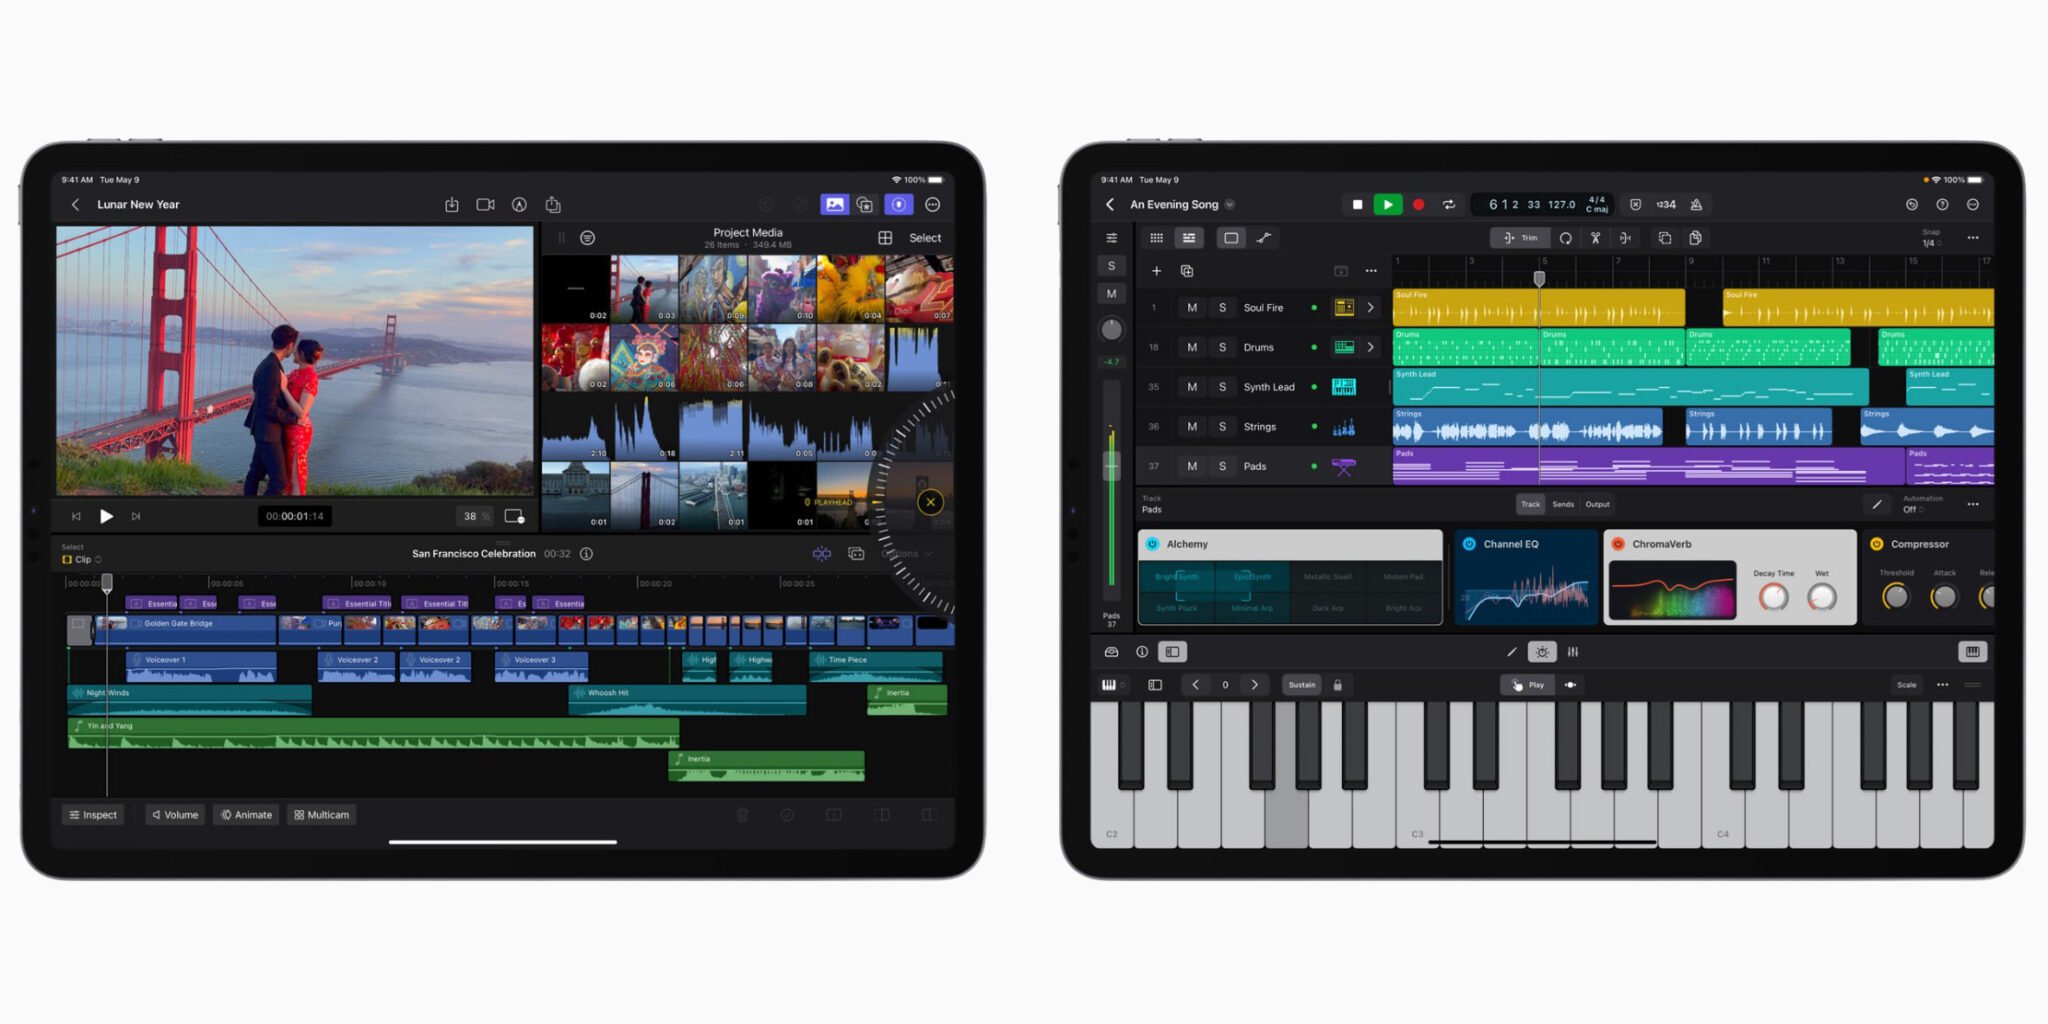 Final Cut Pro and Logic Pro editors have been released on the iPad